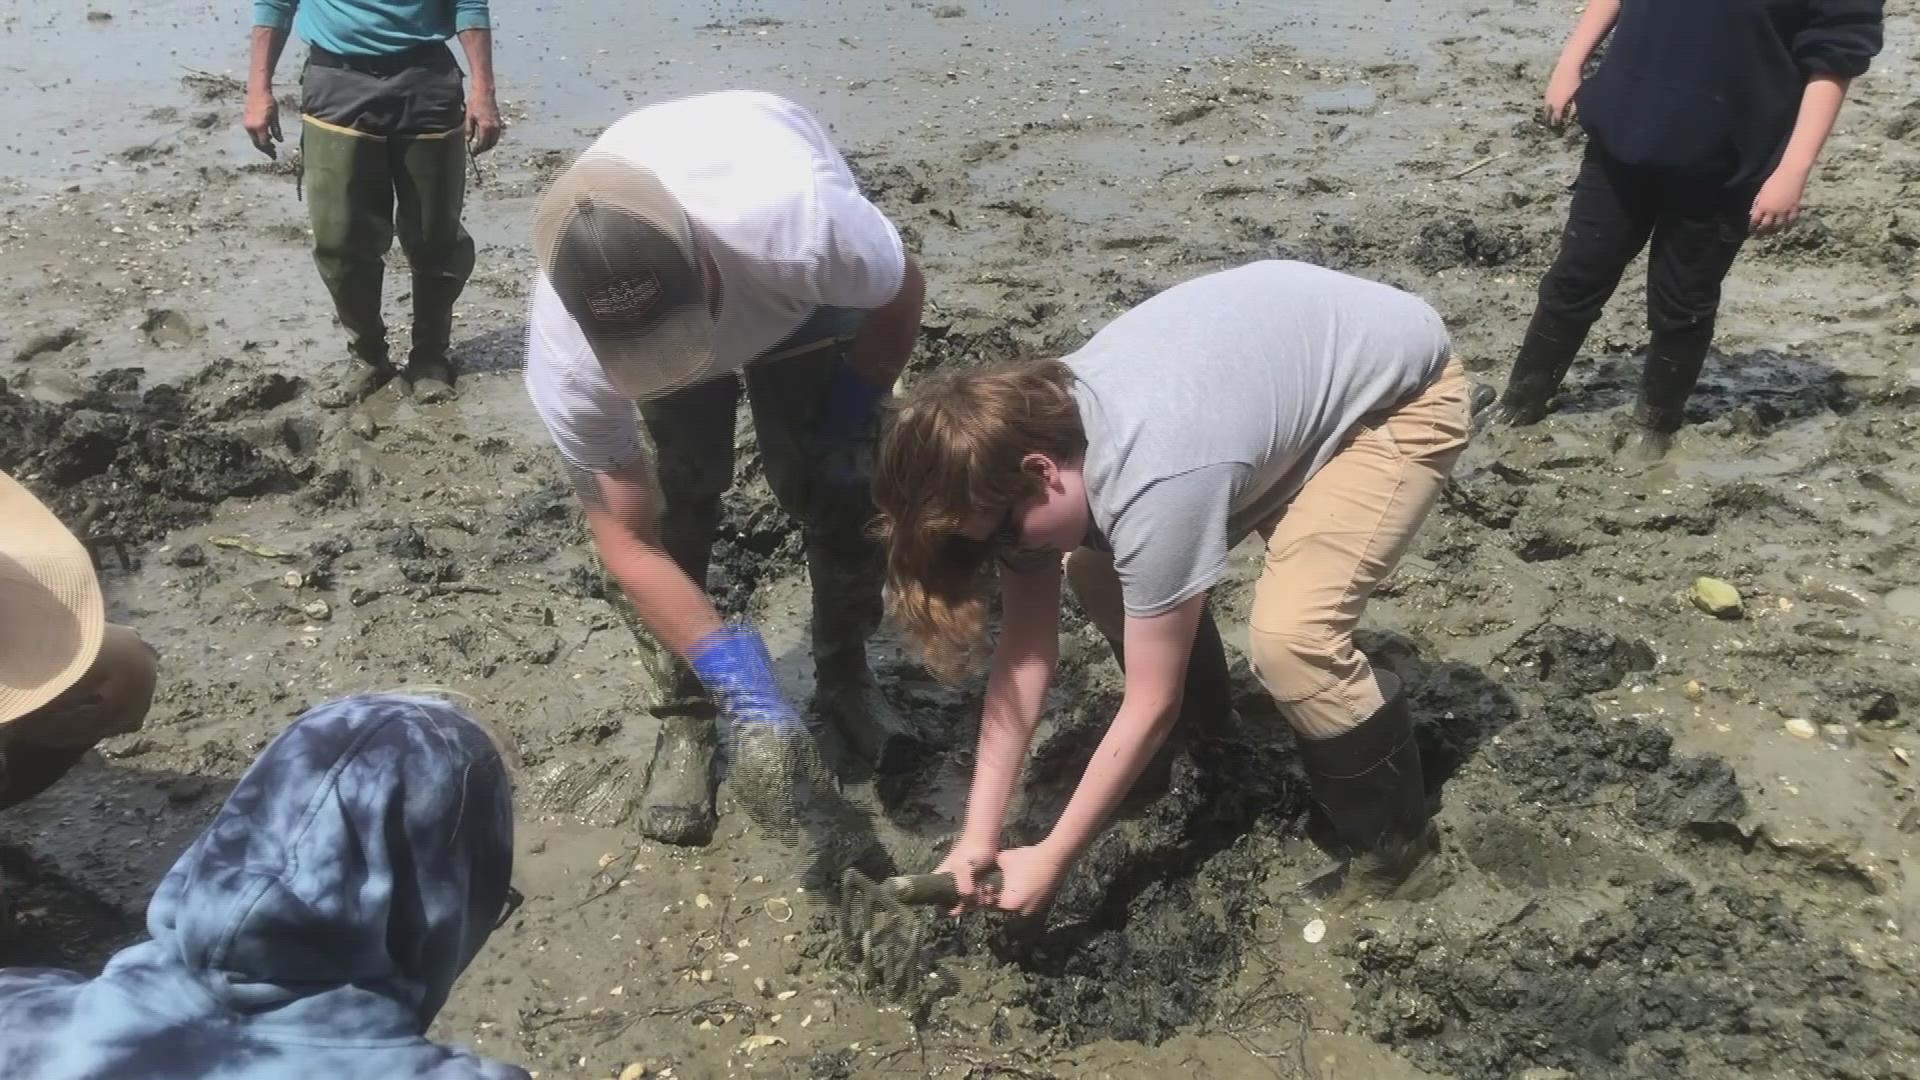 Mt. Ararat students learned about marine resources Monday afternoon in the mudflats of Harpswell.